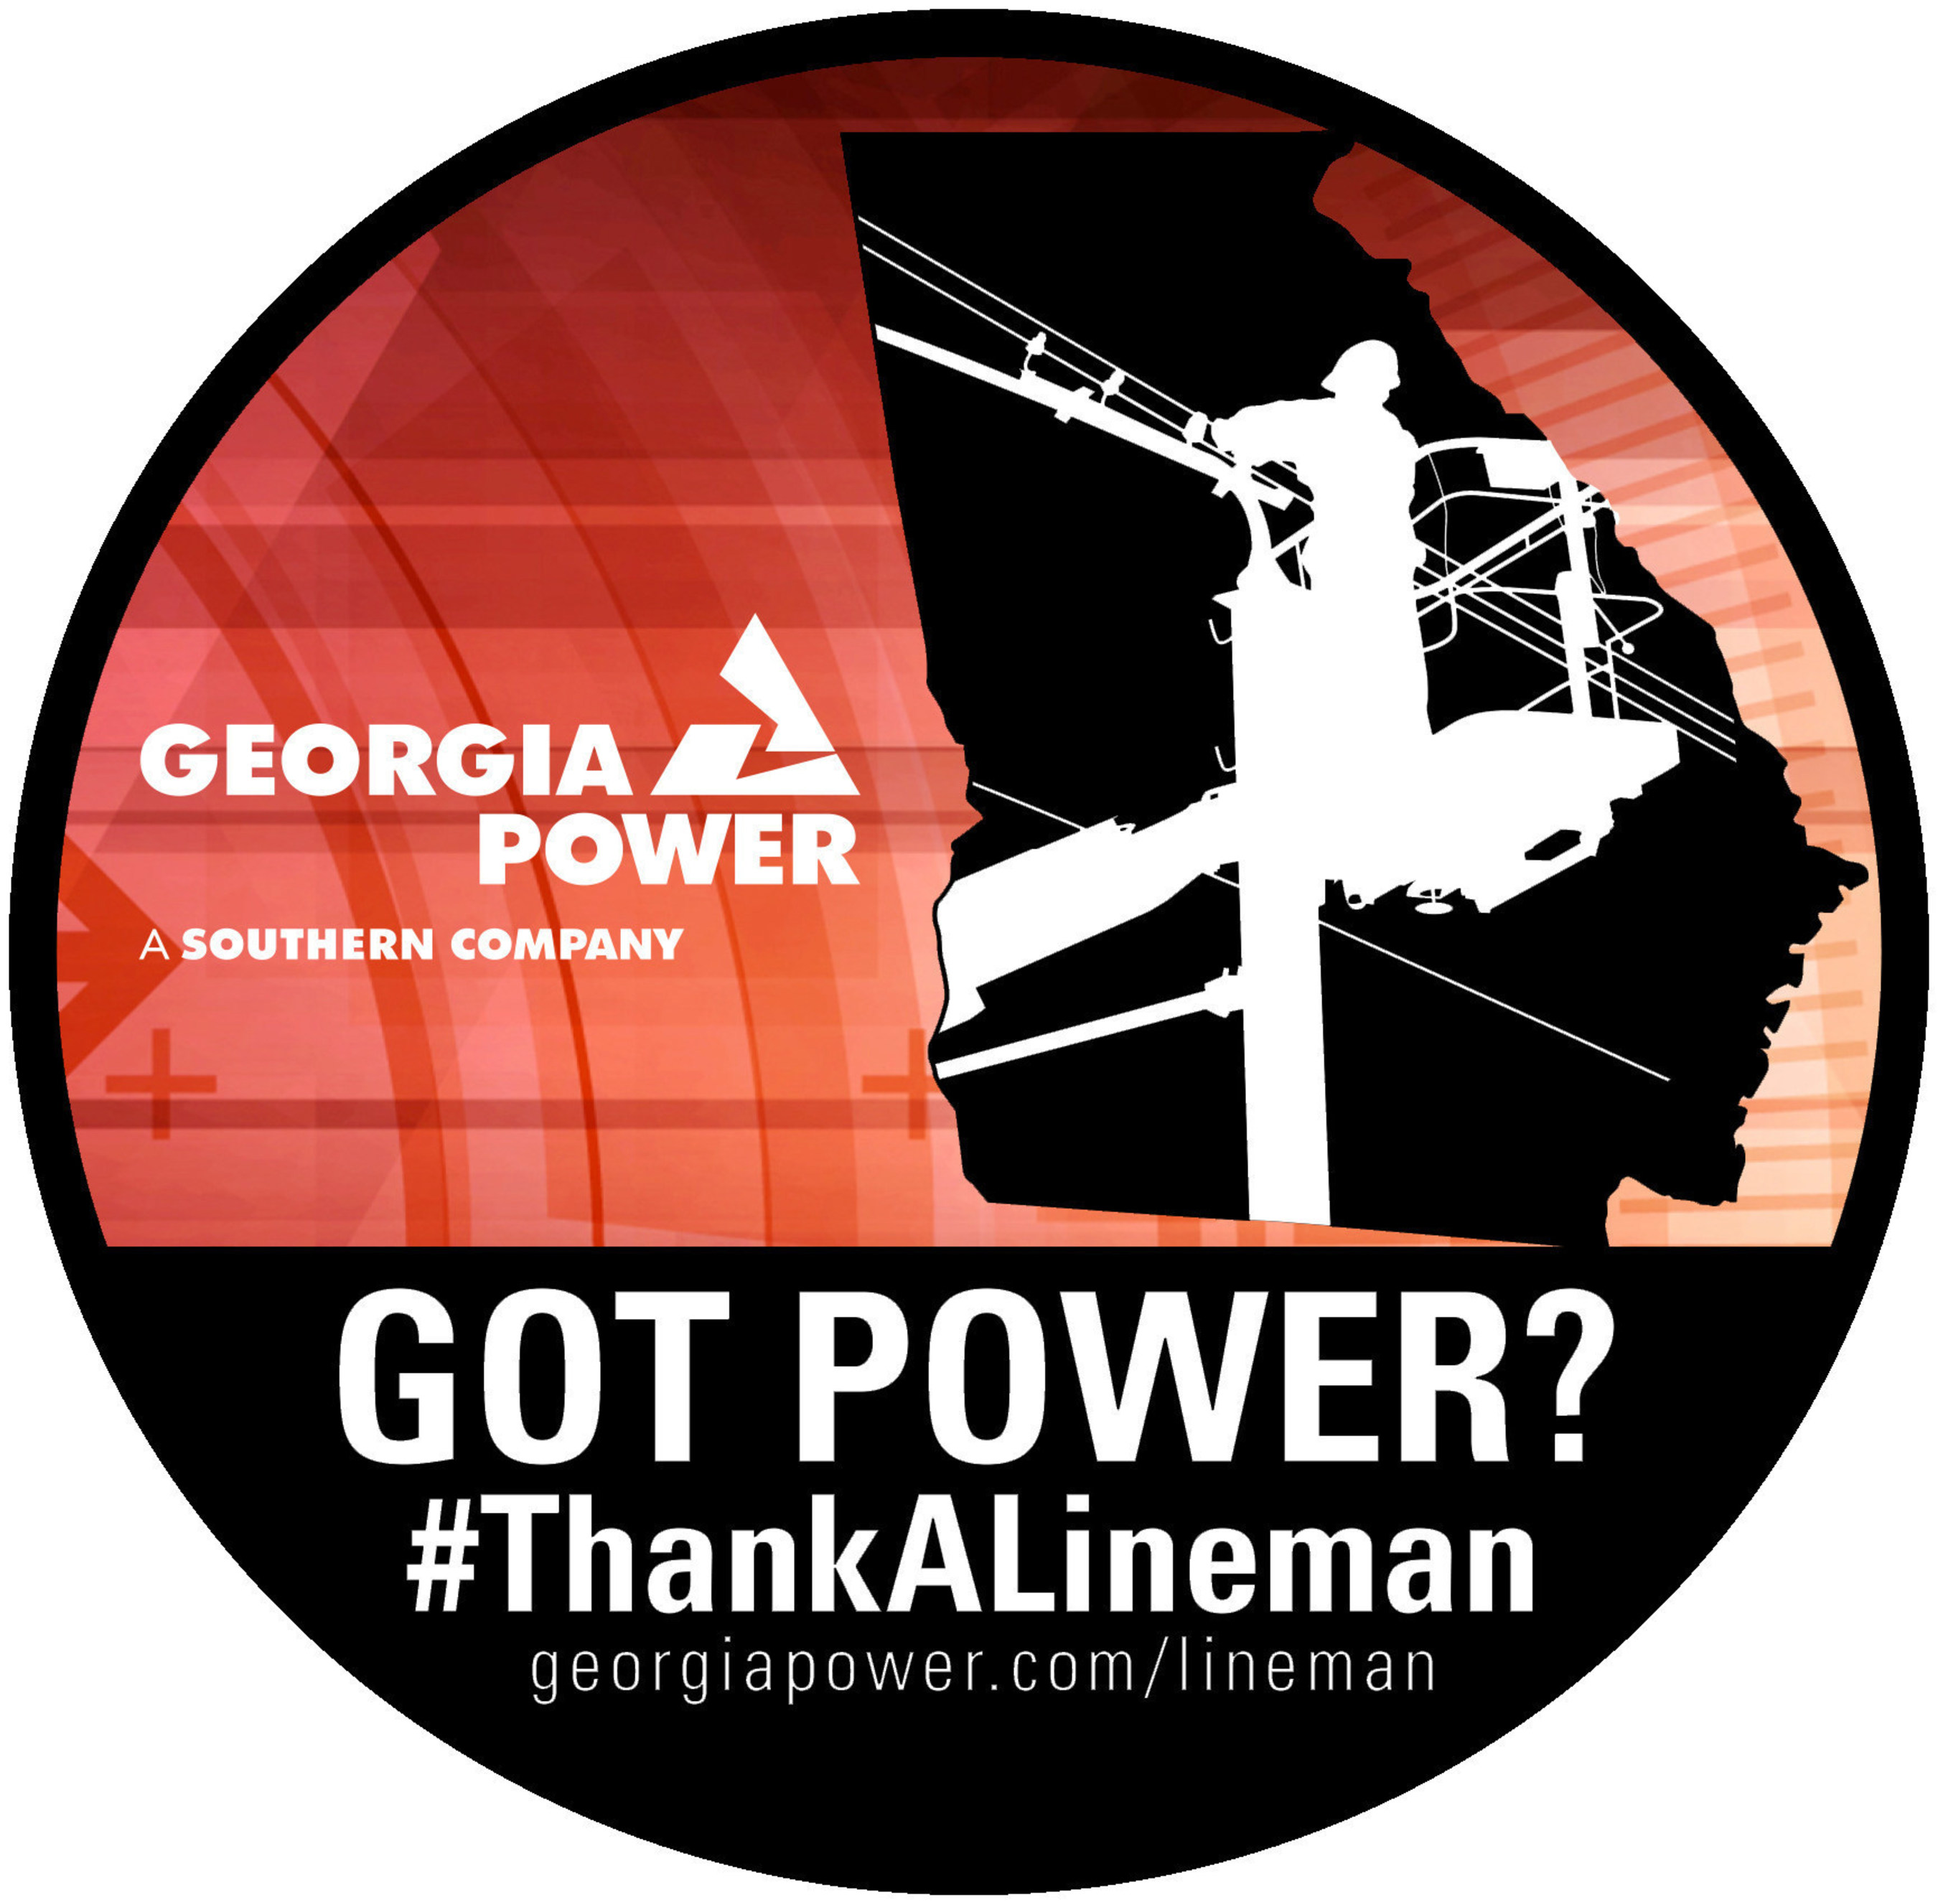 Throughout the week of April 13, Georgia Power is inviting customers, employees and anyone who has been positively impacted by the work of a lineman to #ThankALineman and visit GeorgiaPower.com/Lineman to sign a digital "thank you" card.